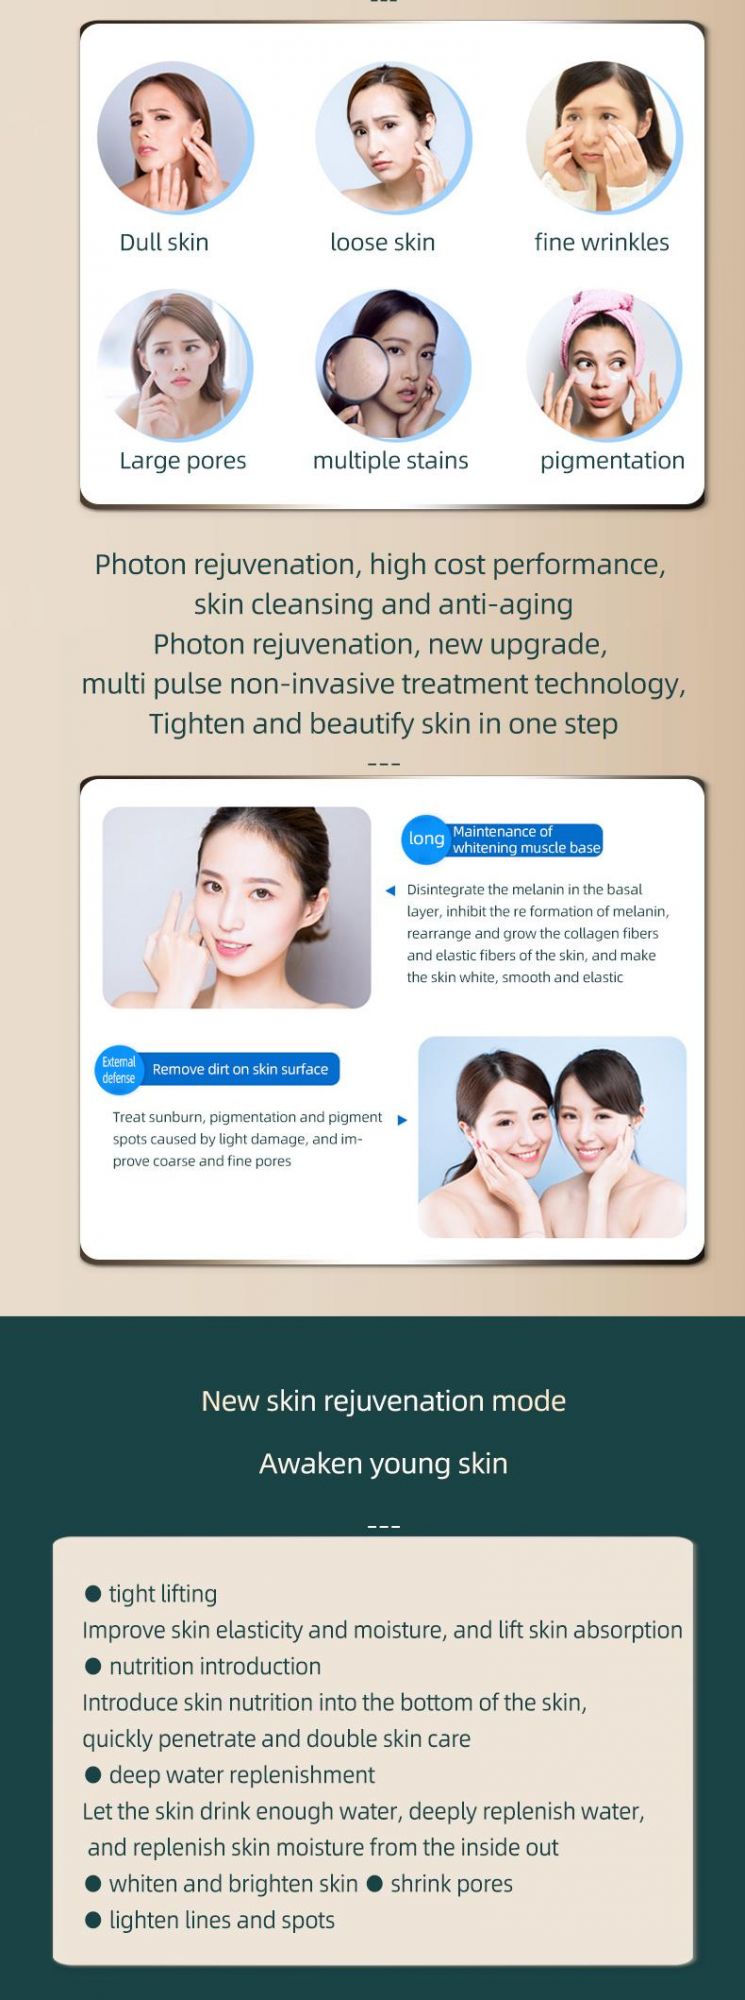 New Technology Dpl Opt Hair Removal and Skin Rejuvenation Comprehensive Instrument for Beauty Salons to Solve Skin Problems